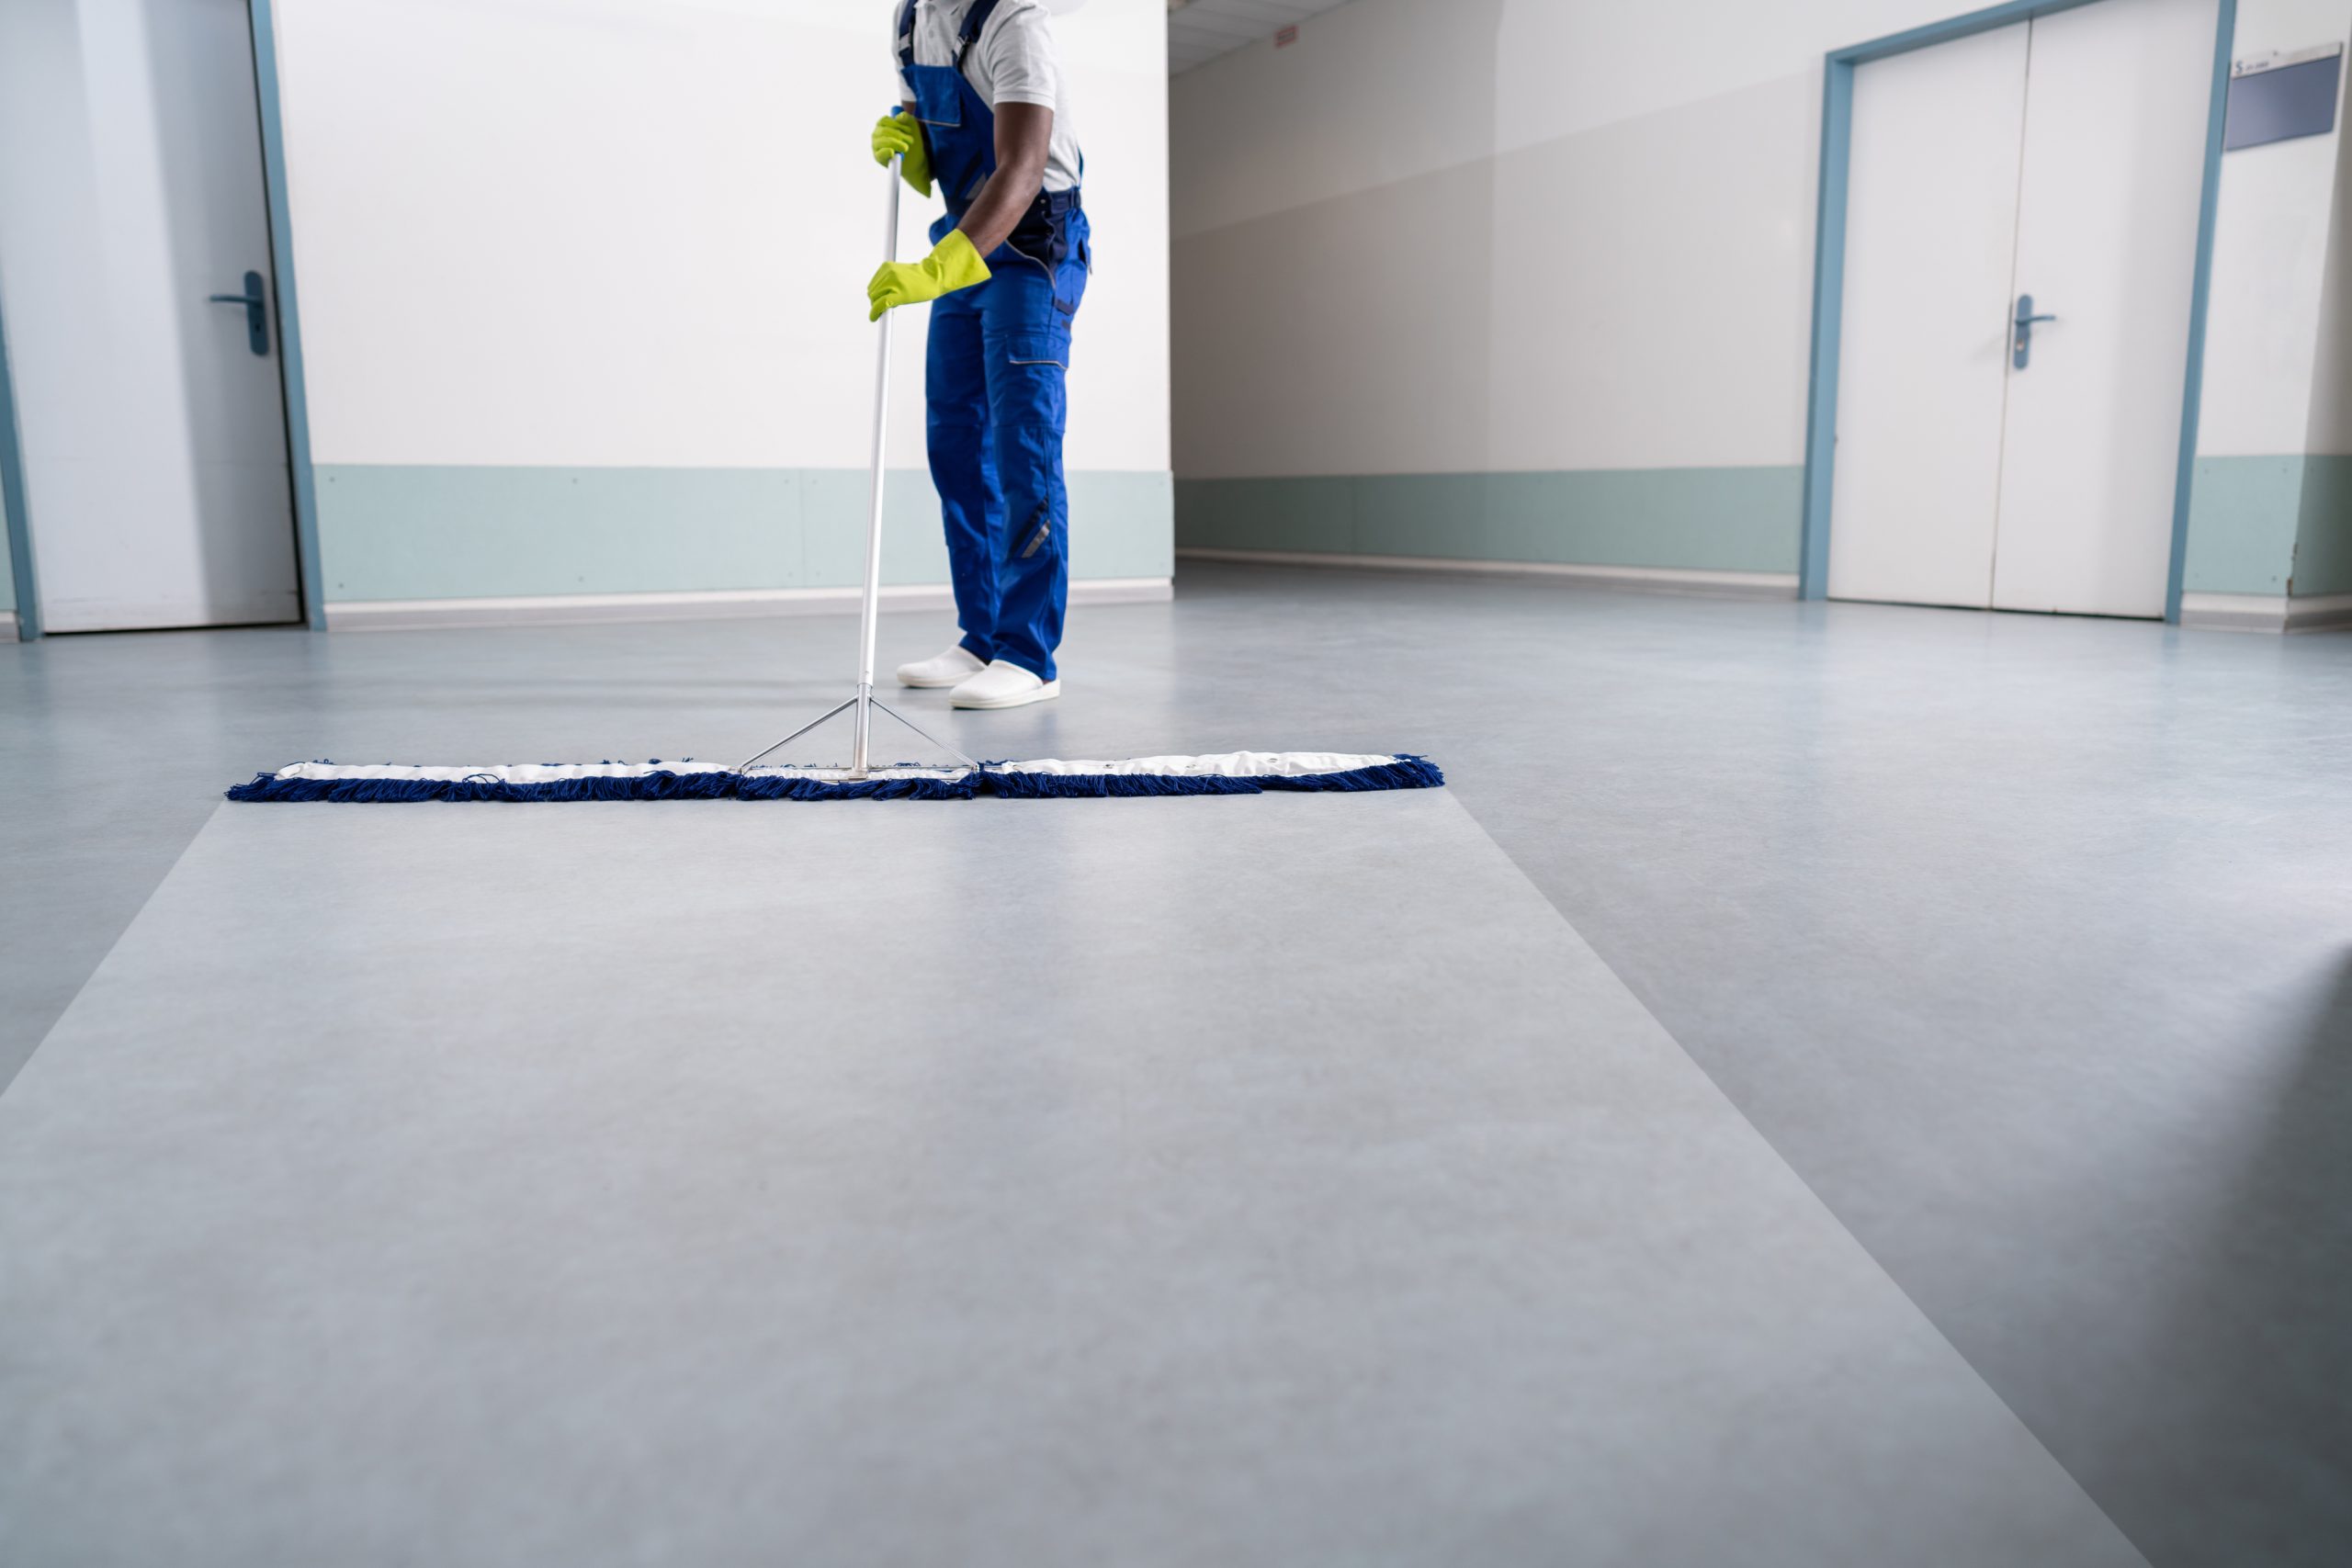 Large office facility building hallways being mopped